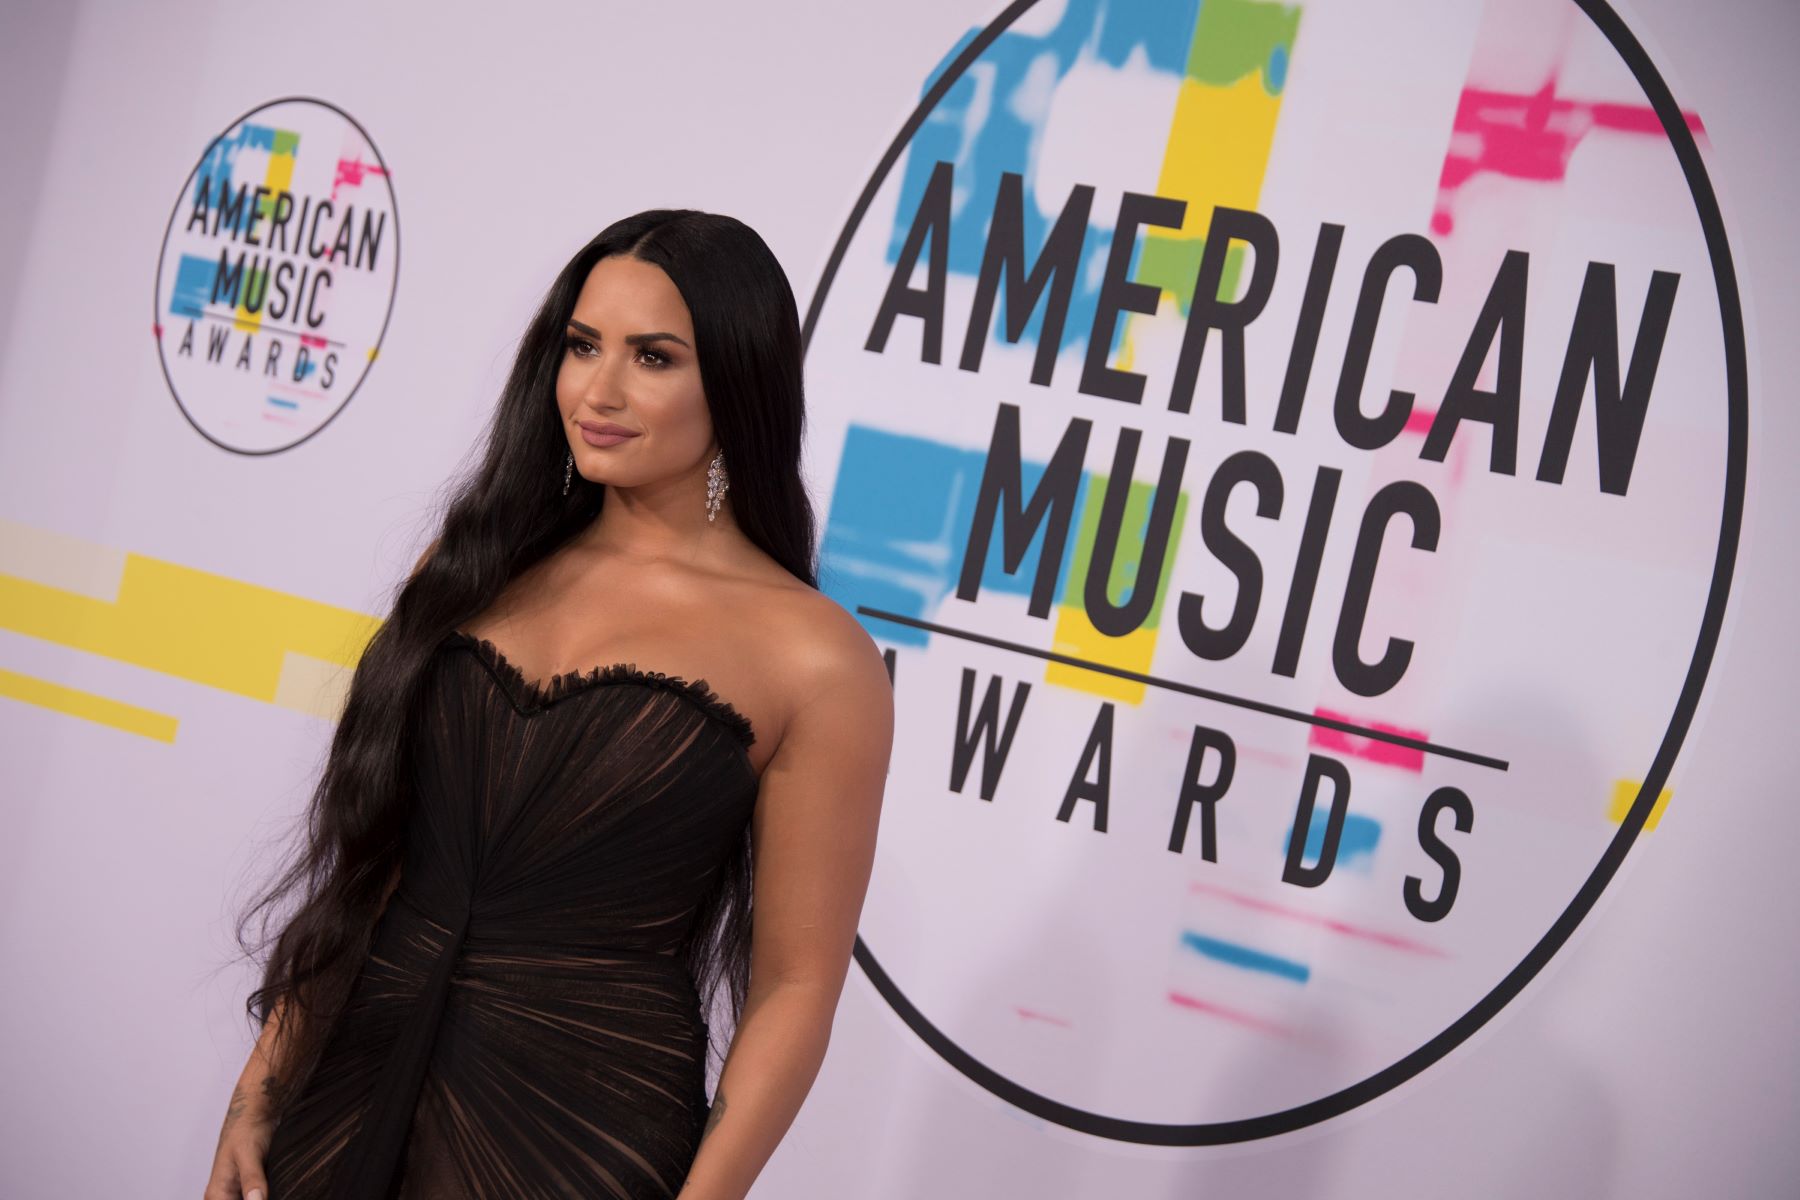 Demi Lovato attending the 2017 American Music Awards at the Microsoft Theater in Los Angeles, California